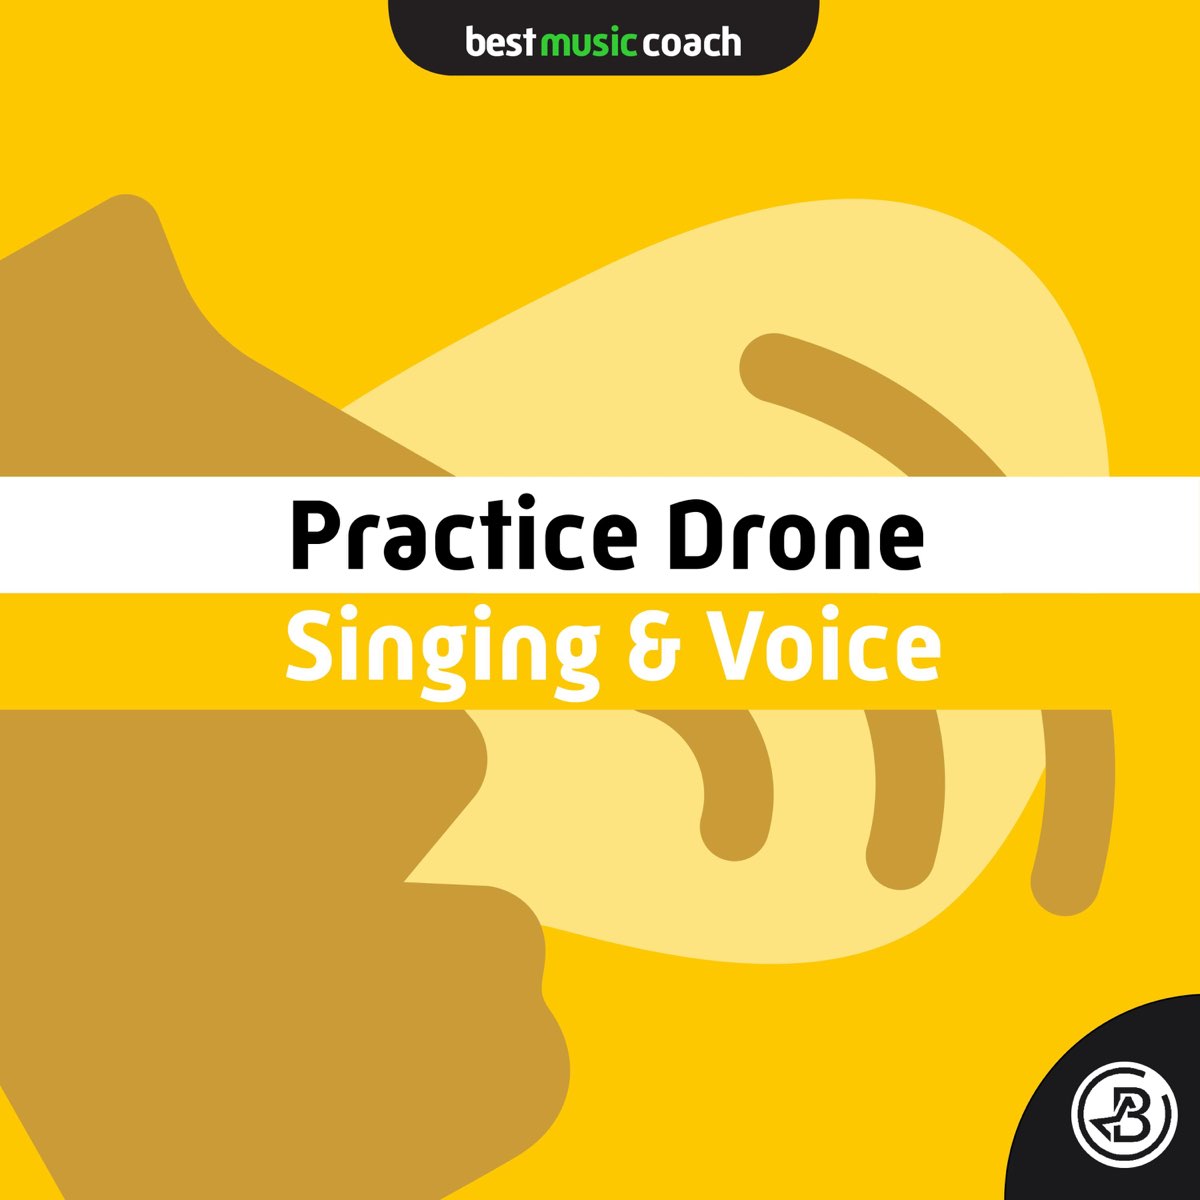 Practice Drone for Singing & Voice - Album by Best Music Coach Backing  Tracks - Apple Music